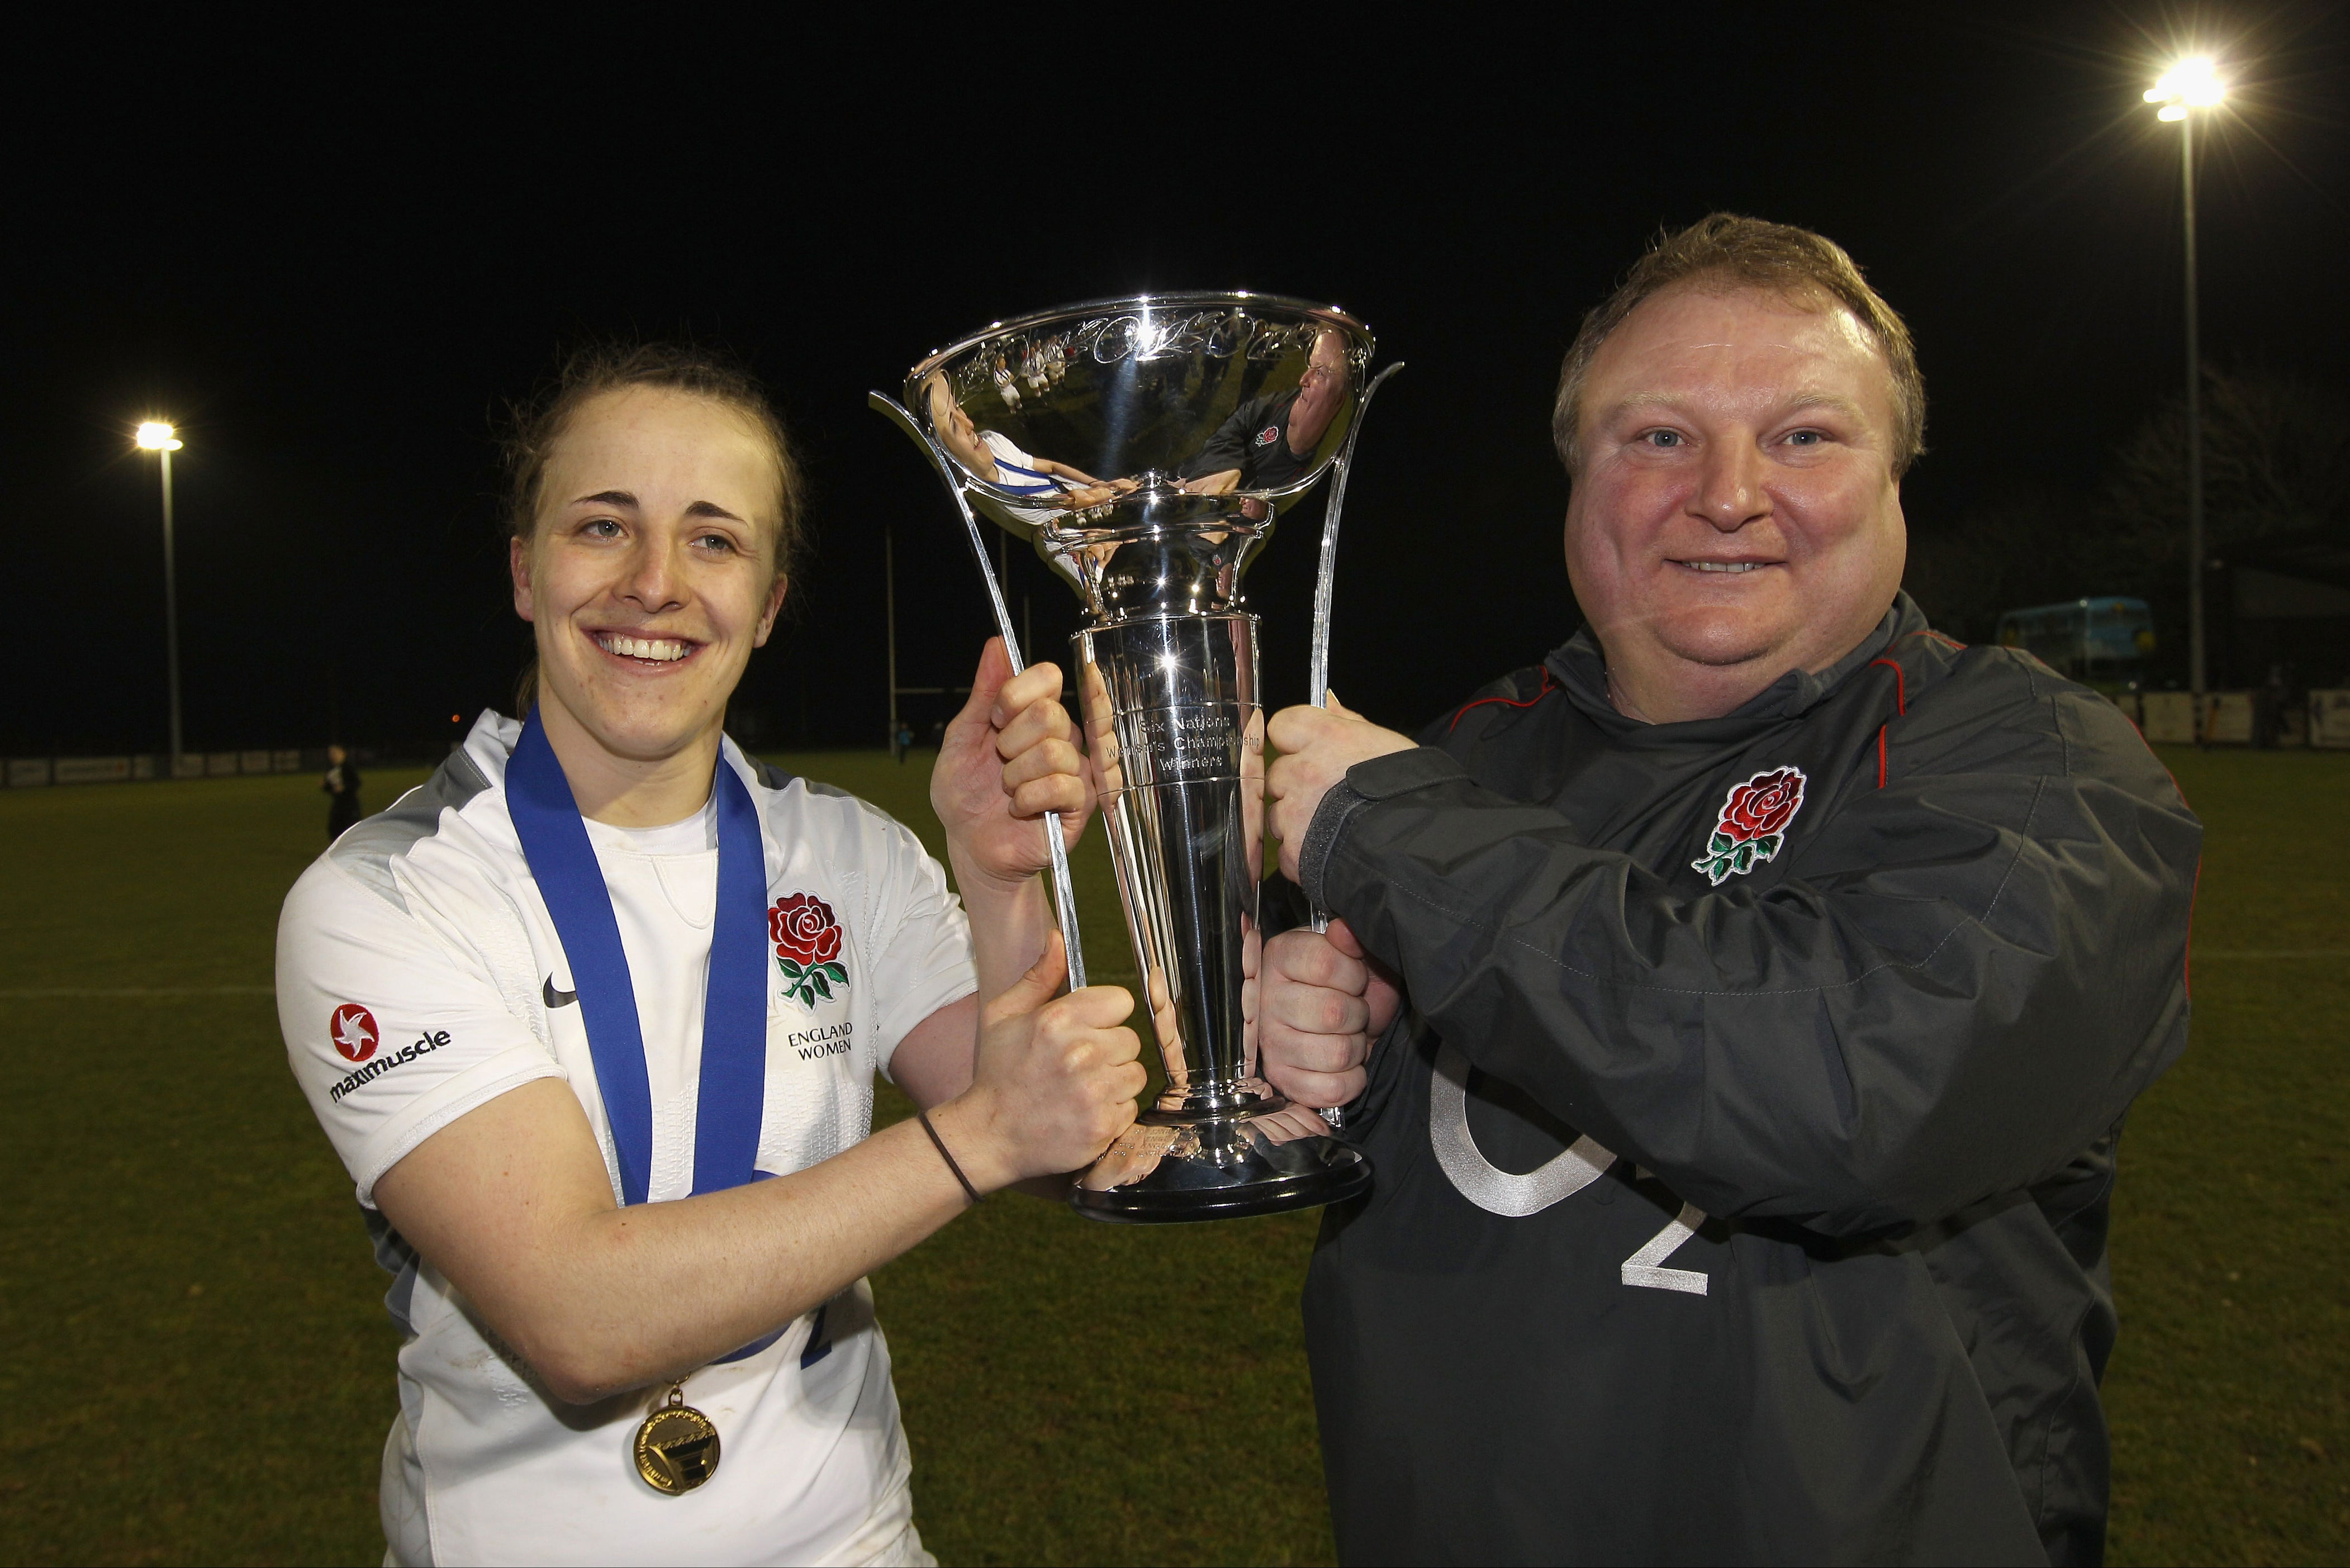 red roses return to twickenham with women’s rugby ready for next step